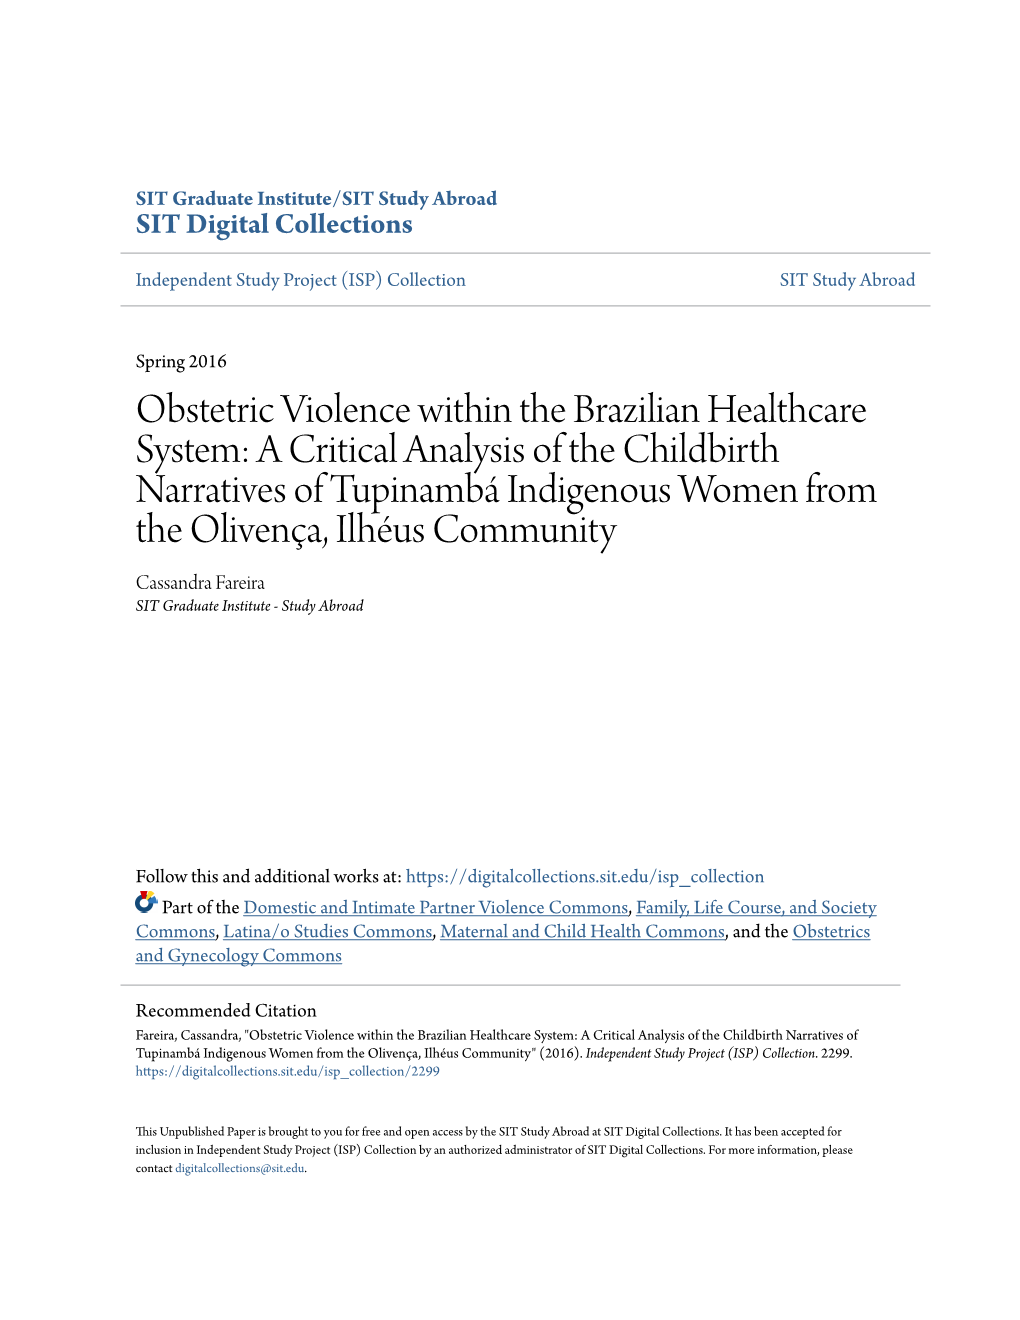 Obstetric Violence Within the Brazilian Healthcare System